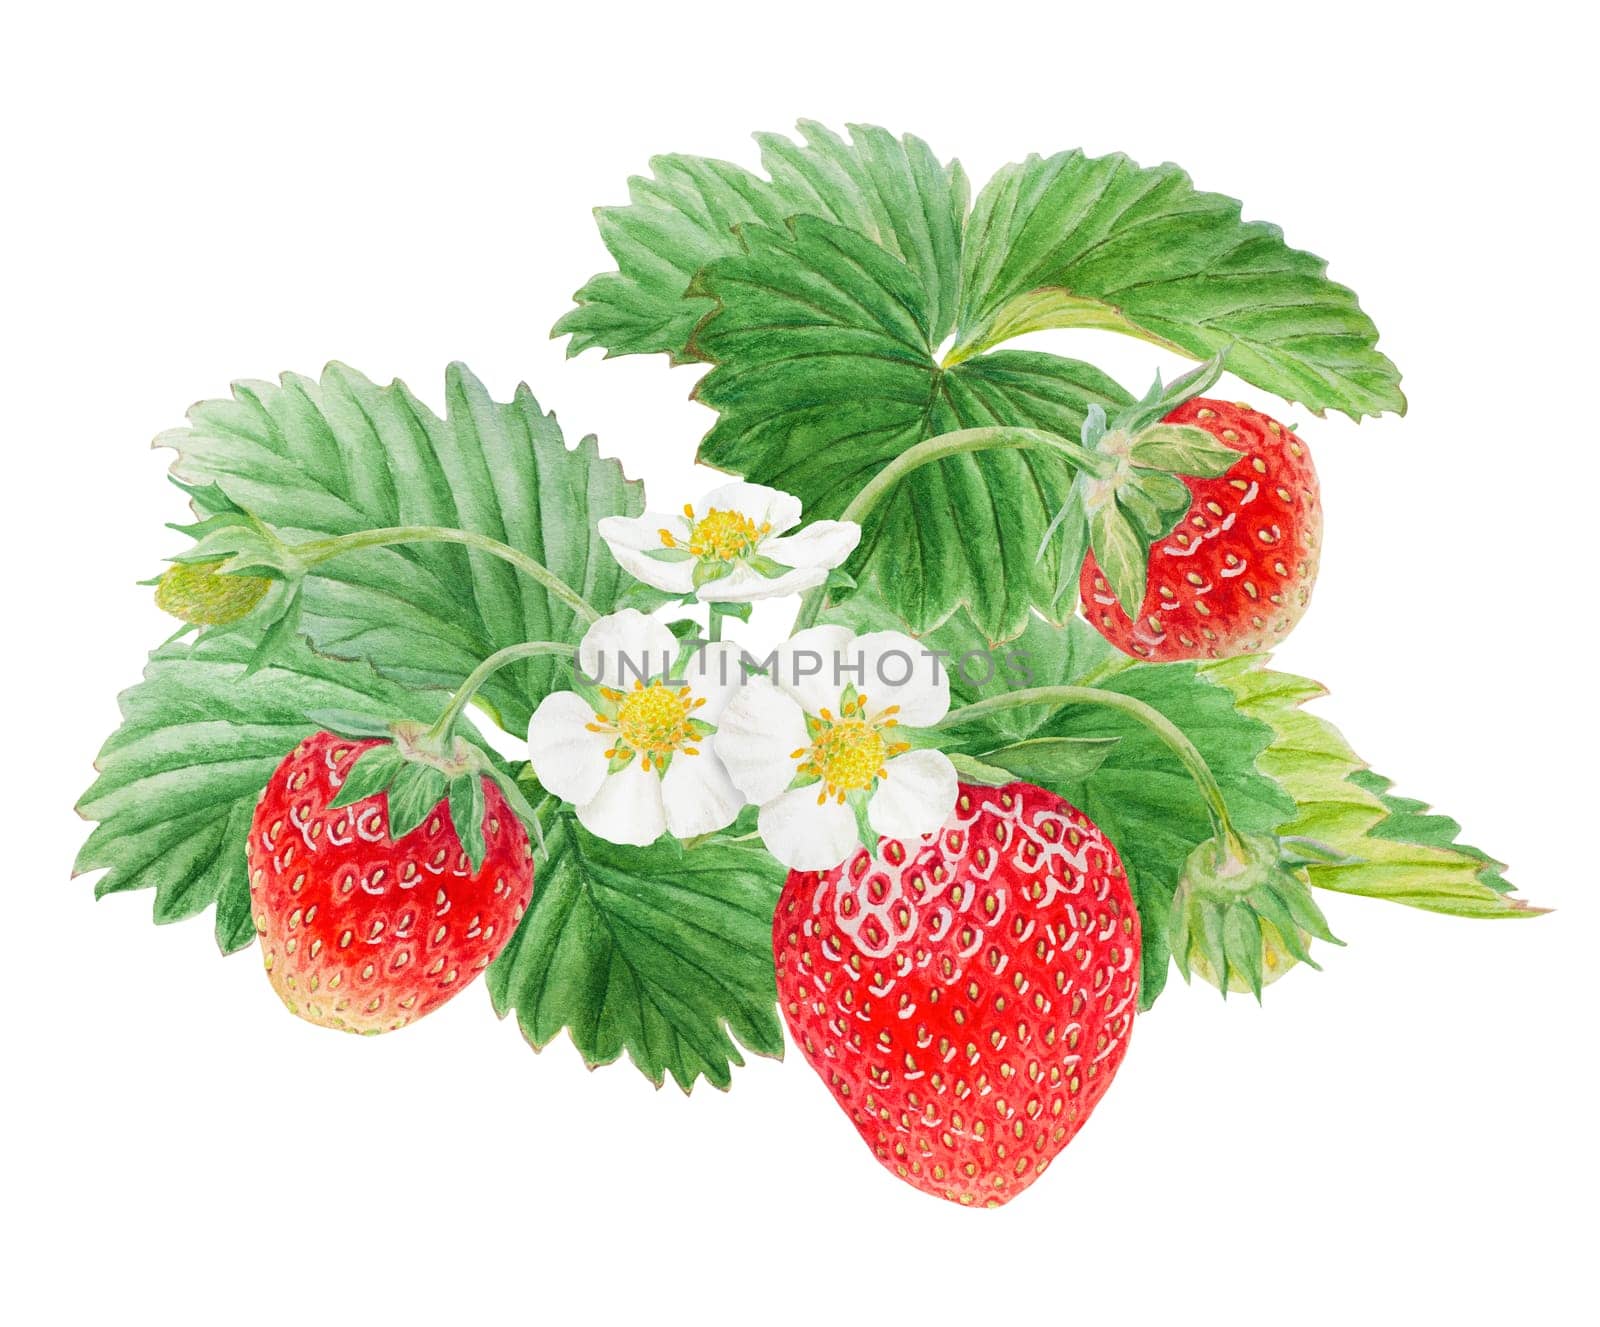 Red strawberry with white flowers bush handdrawn watercolor illustration. Food art, fresh botanical realistic painting. Summer sweet berry clipart for restaurant, cafe menu, farm goods, vegan products by florainlove_art